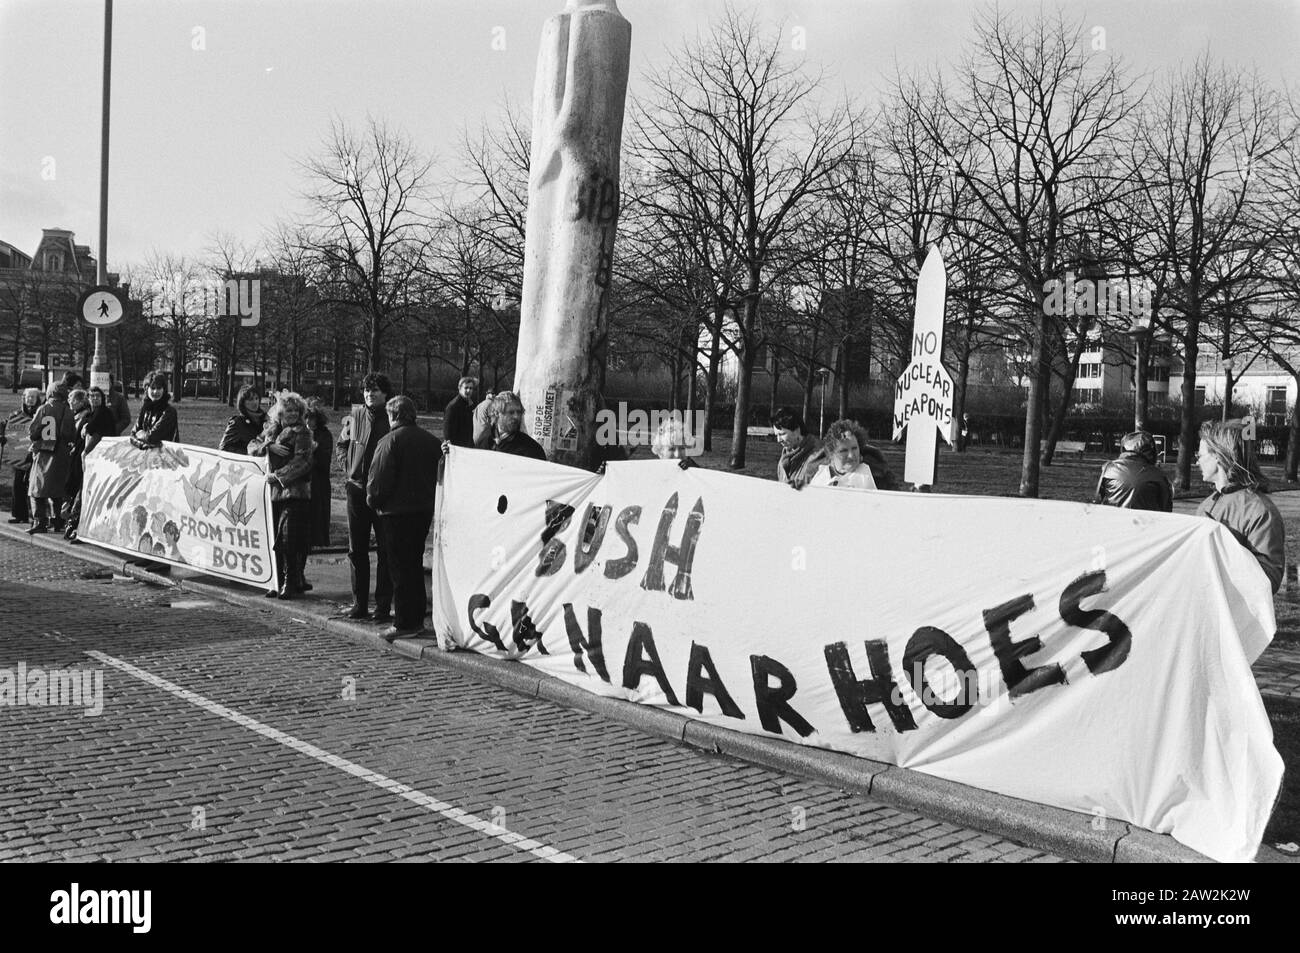 Visit of US Vice President George Bush  Picket line at the American consulate in Amsterdam against the visit of the Vice President Date: February 1, 1983 Location: Amsterdam, Noord -Holland Keywords: demonstrations, banners, state visits Person Name: Bush, George Stock Photo